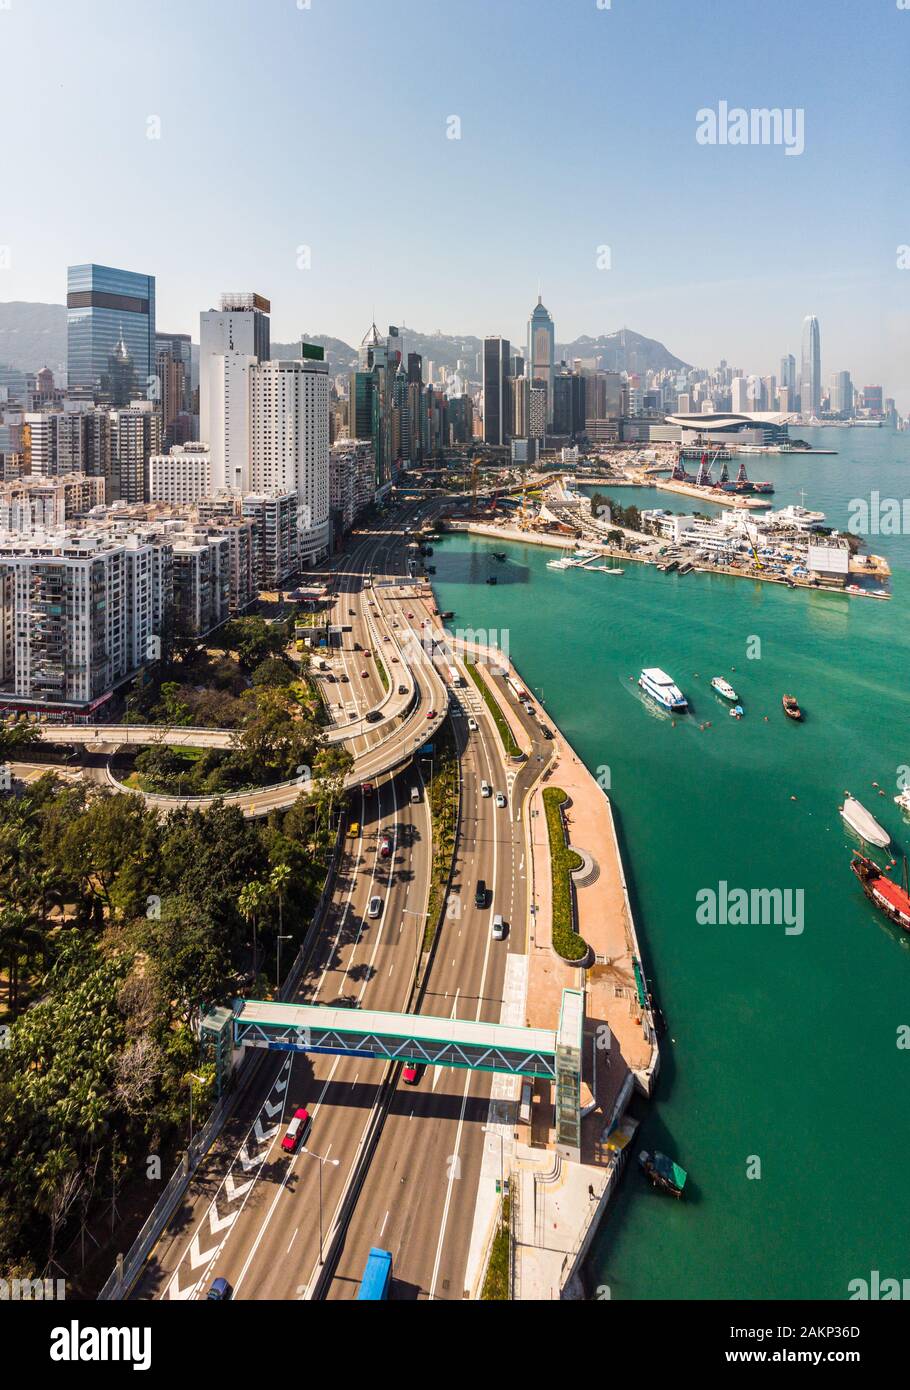 Aerial view of the highway along the Causeway Bay shopping district in Hong Kong island by Victoria harbor Stock Photo